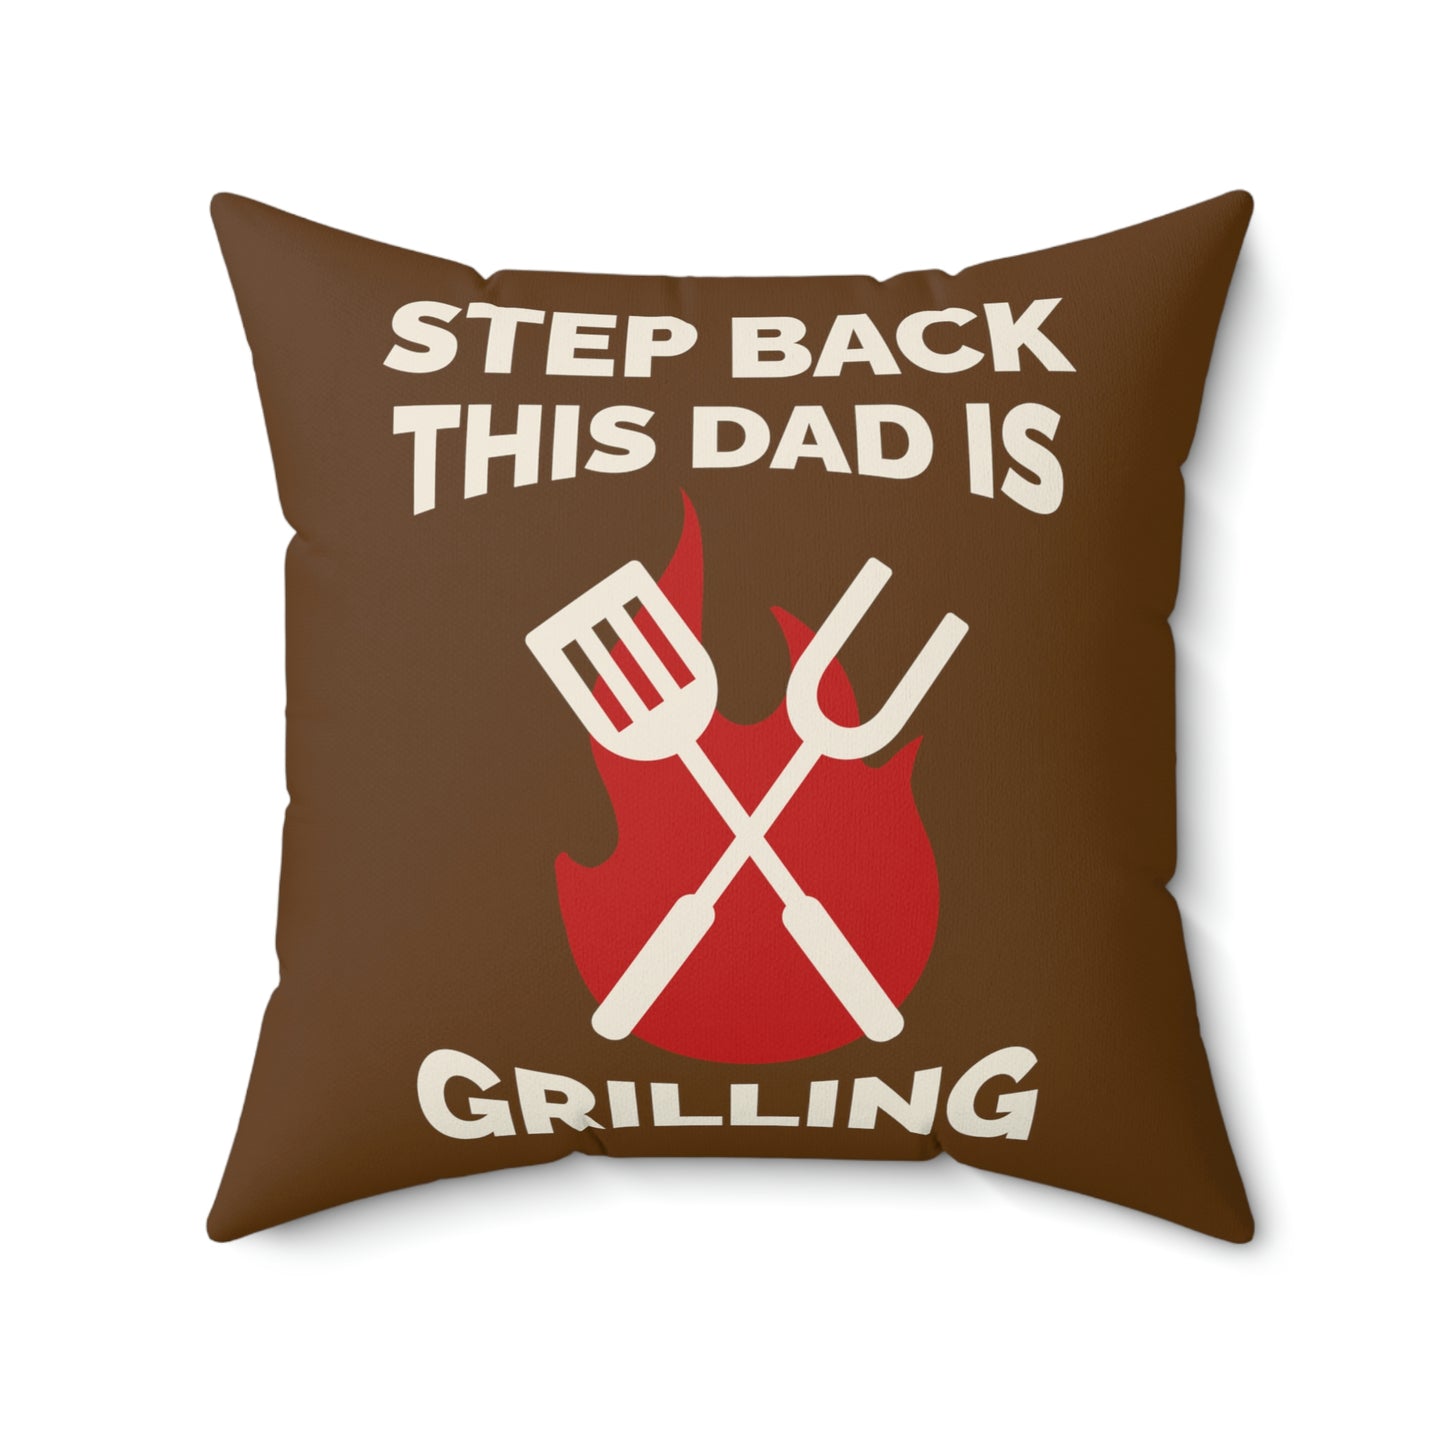 Spun Polyester Square Pillow Case "Step Back This Dad Is Grilling on Brown”